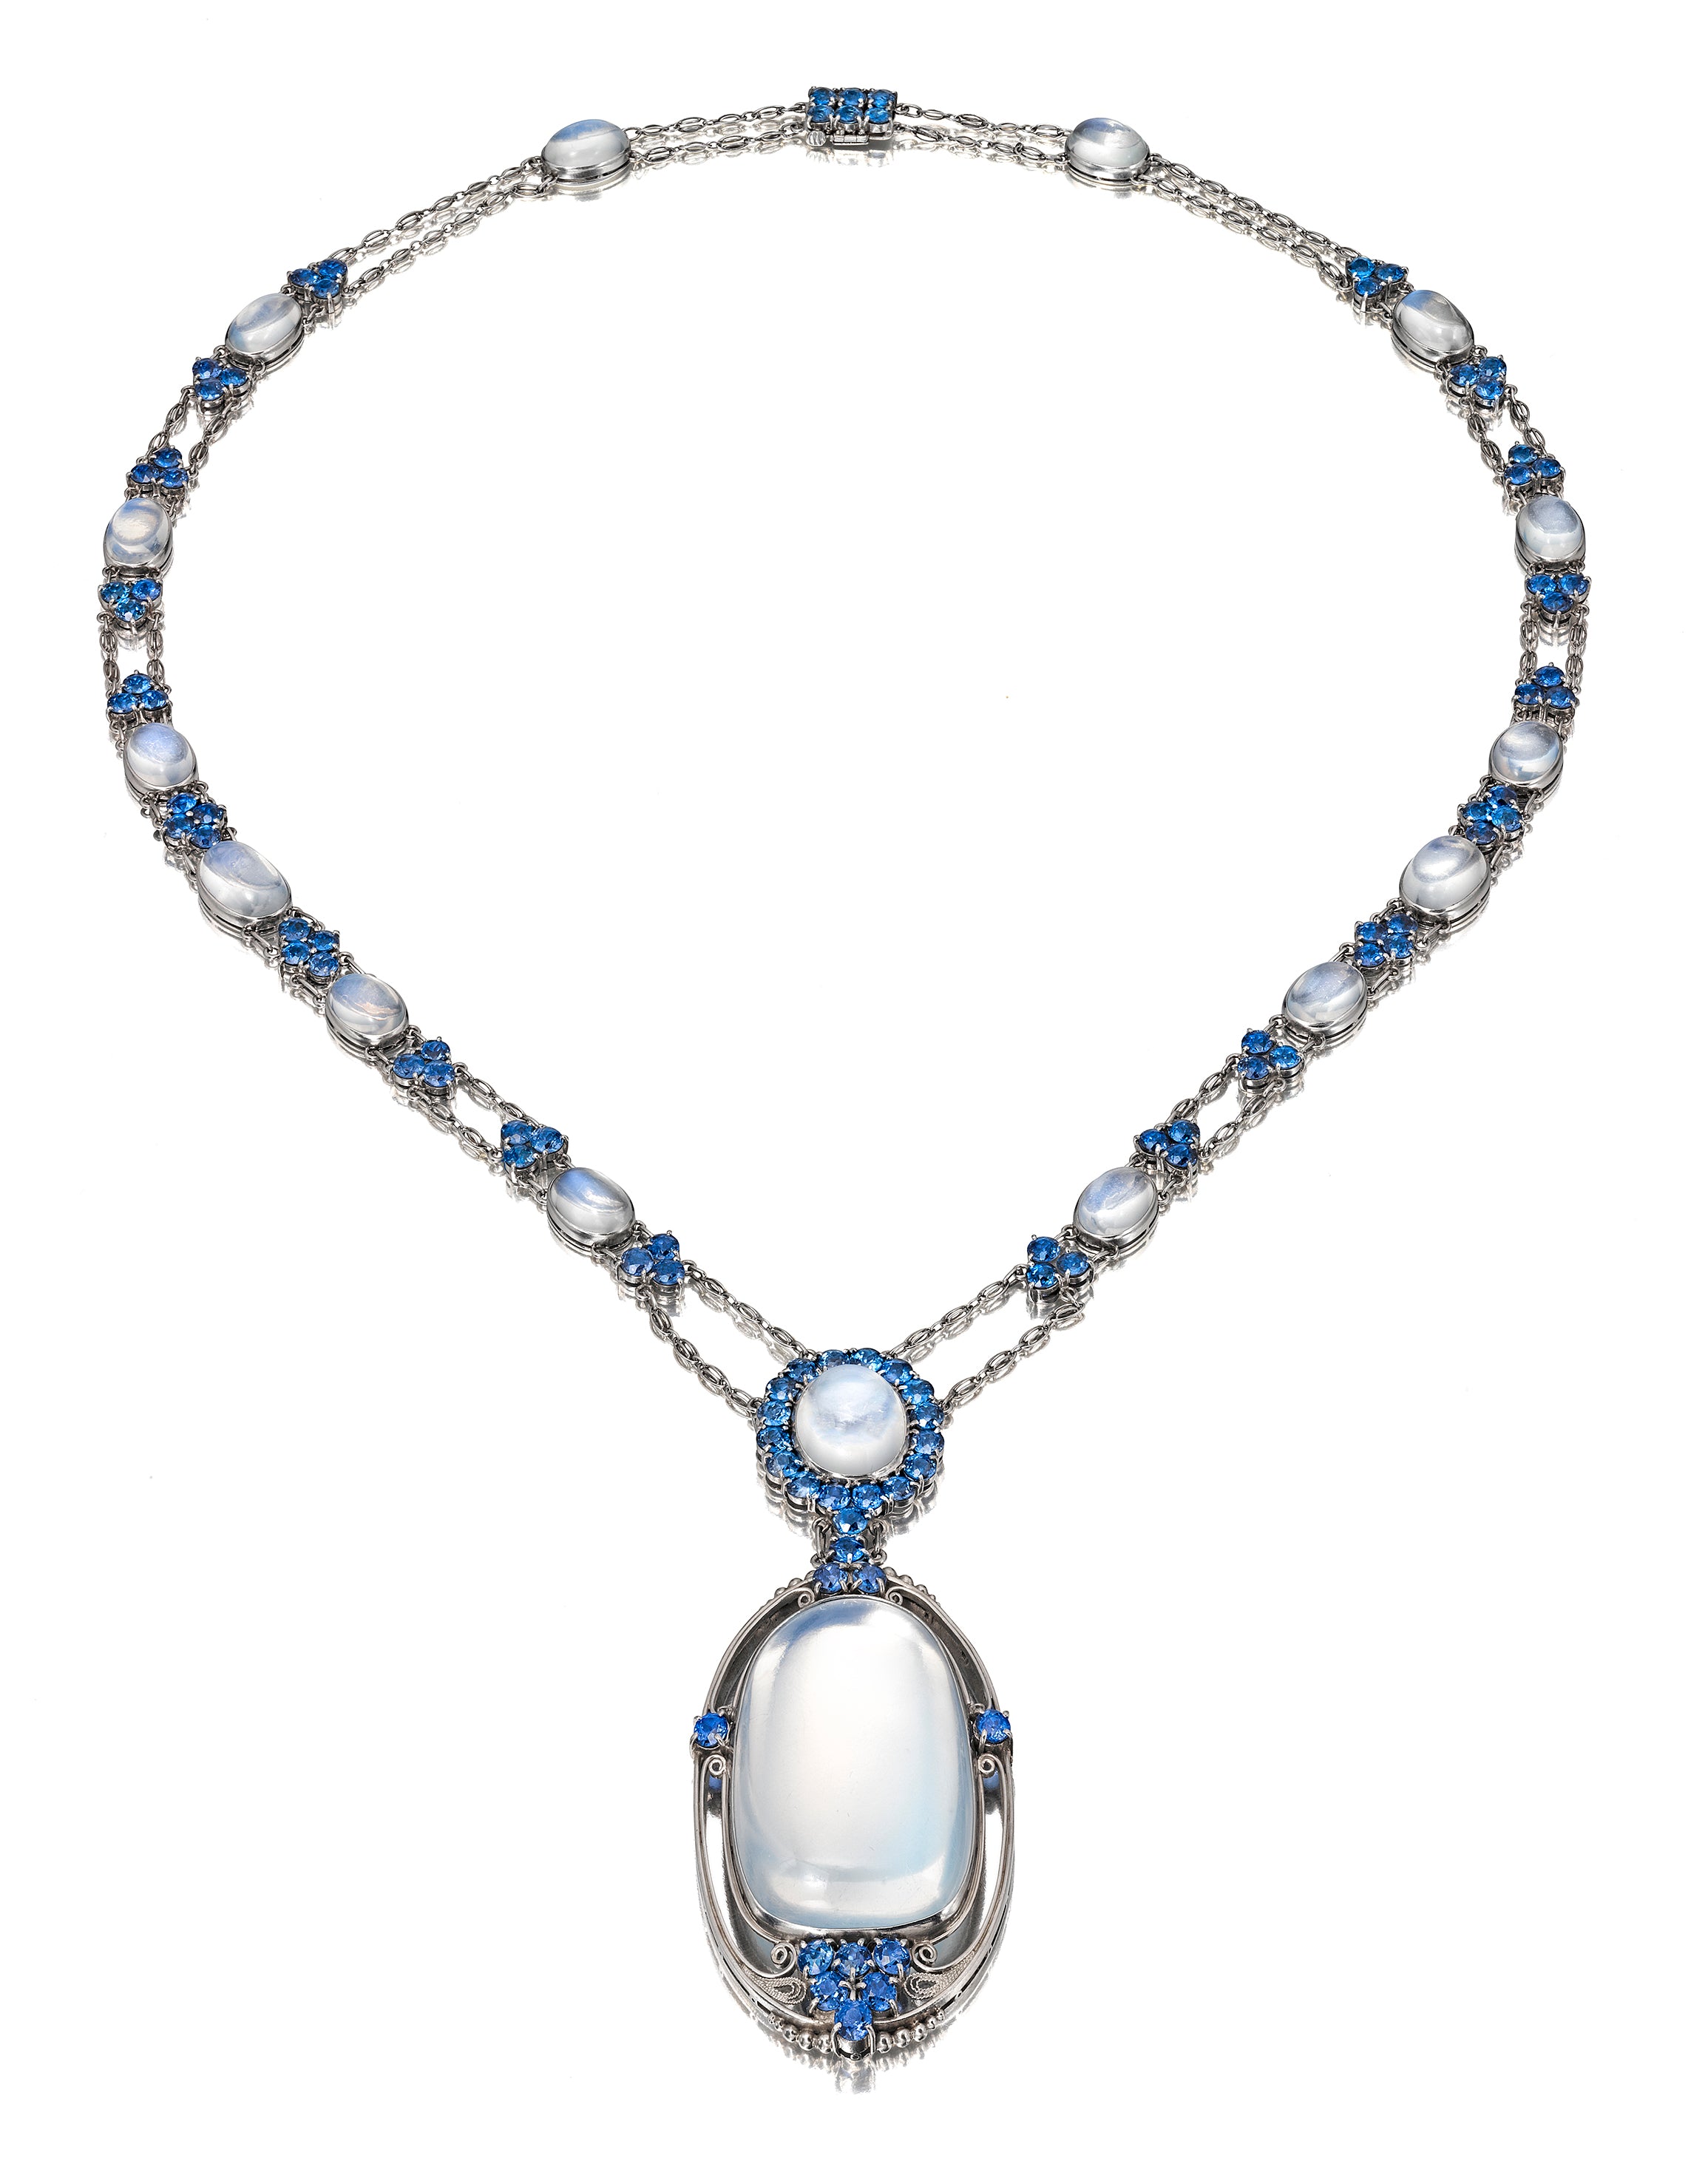 MOONSTONE  AND  SAPPHIRE  NECKLACE  DESIGNED BY  LOUIS  COMFORT  TIFFANY  FOR  TIFFANY  &  CO.,  NEW  YORK,  CIRCA  1915